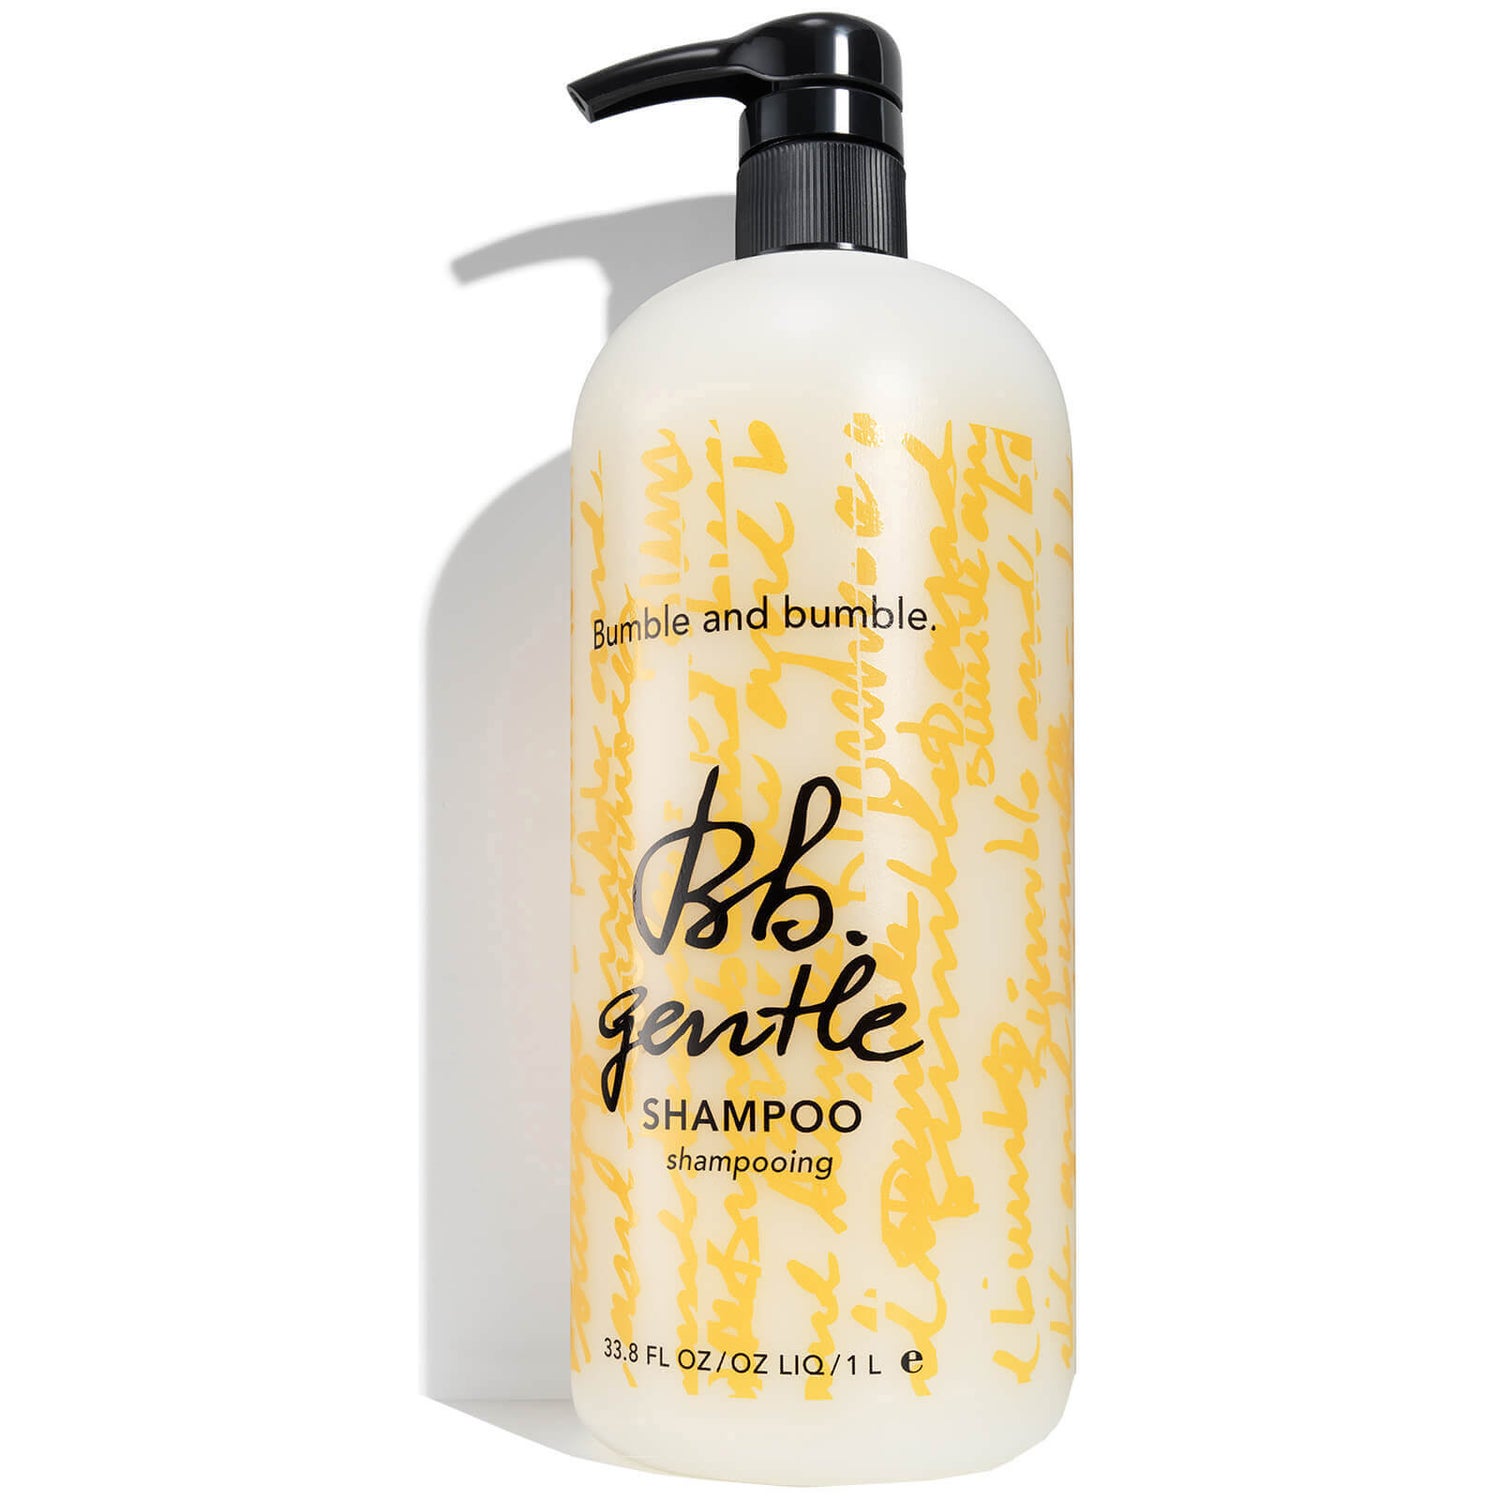 Champú suave Bumble and bumble GENTLE 1000ml